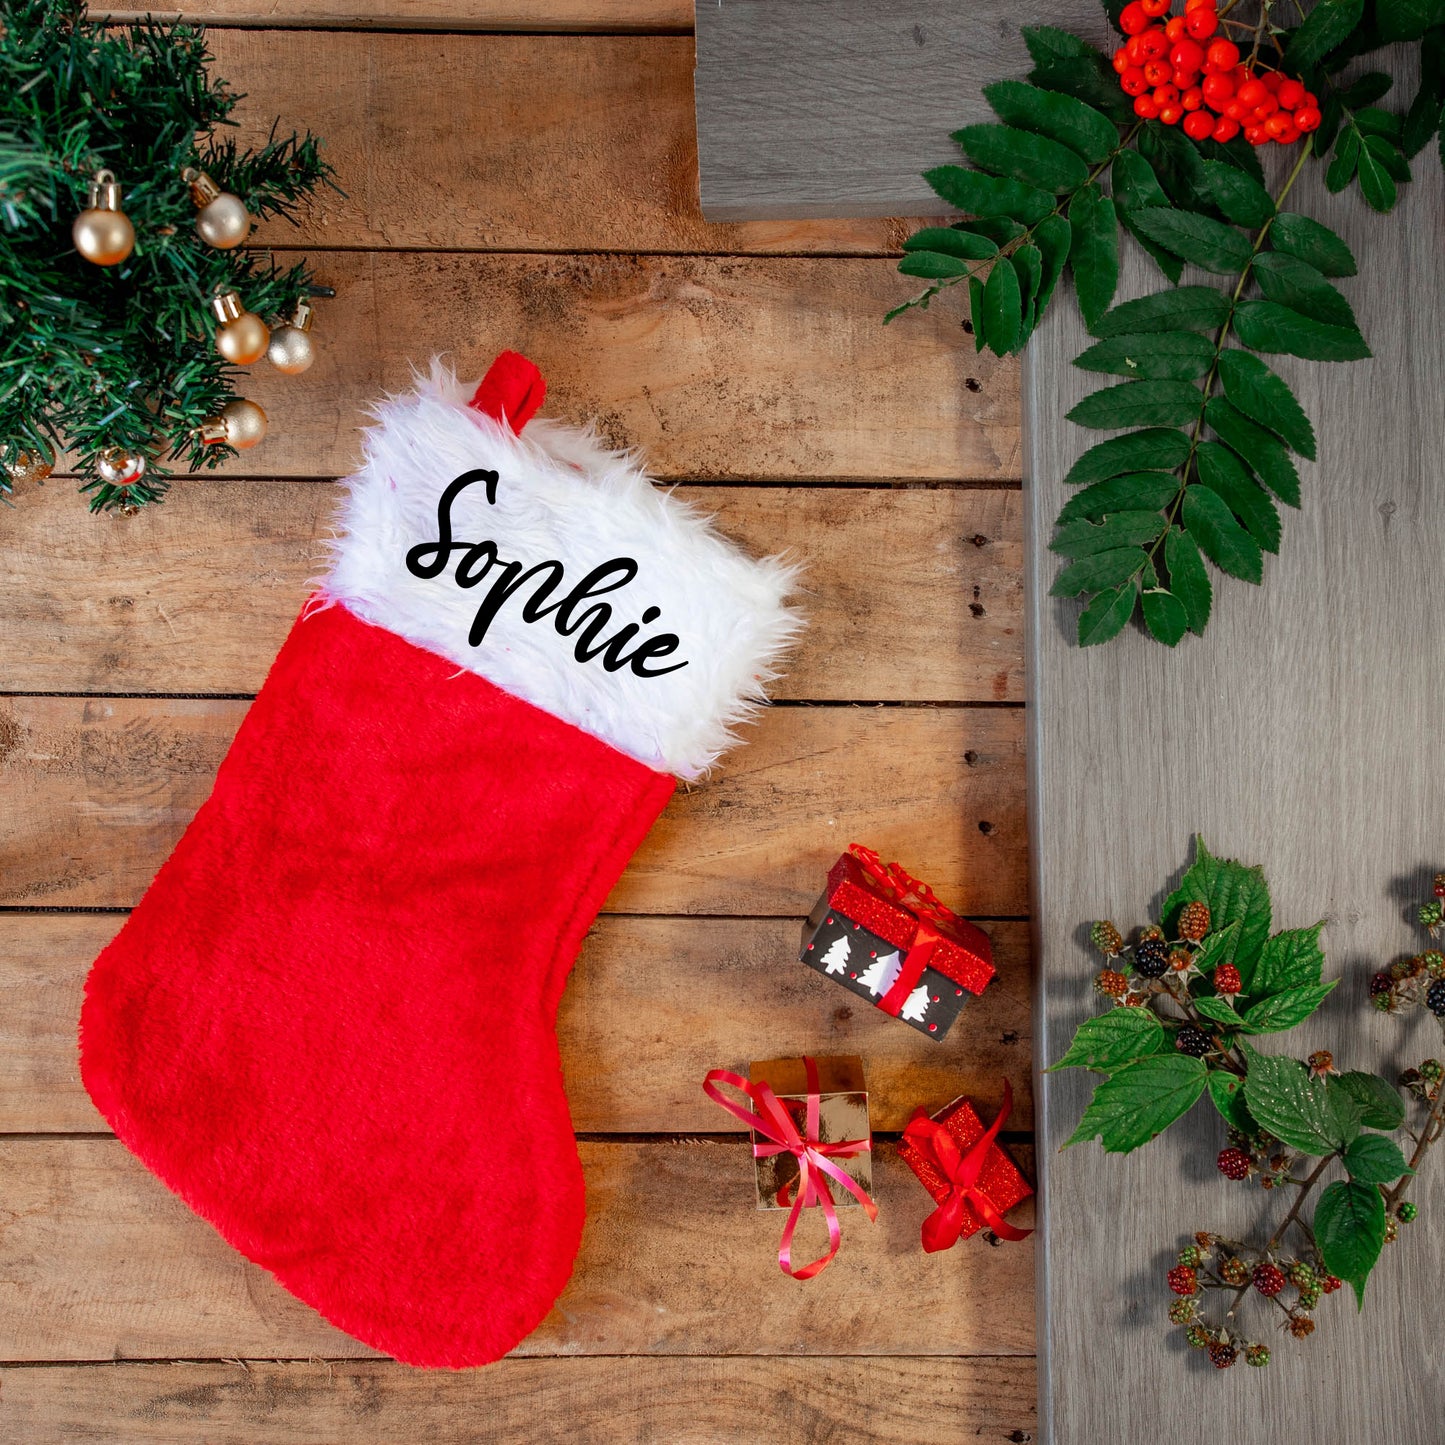 Embroidered Luxury Plush Red Christmas Stocking Jumbo or Standard Size Personalised With Any Name  - Always Looking Good - Standard  